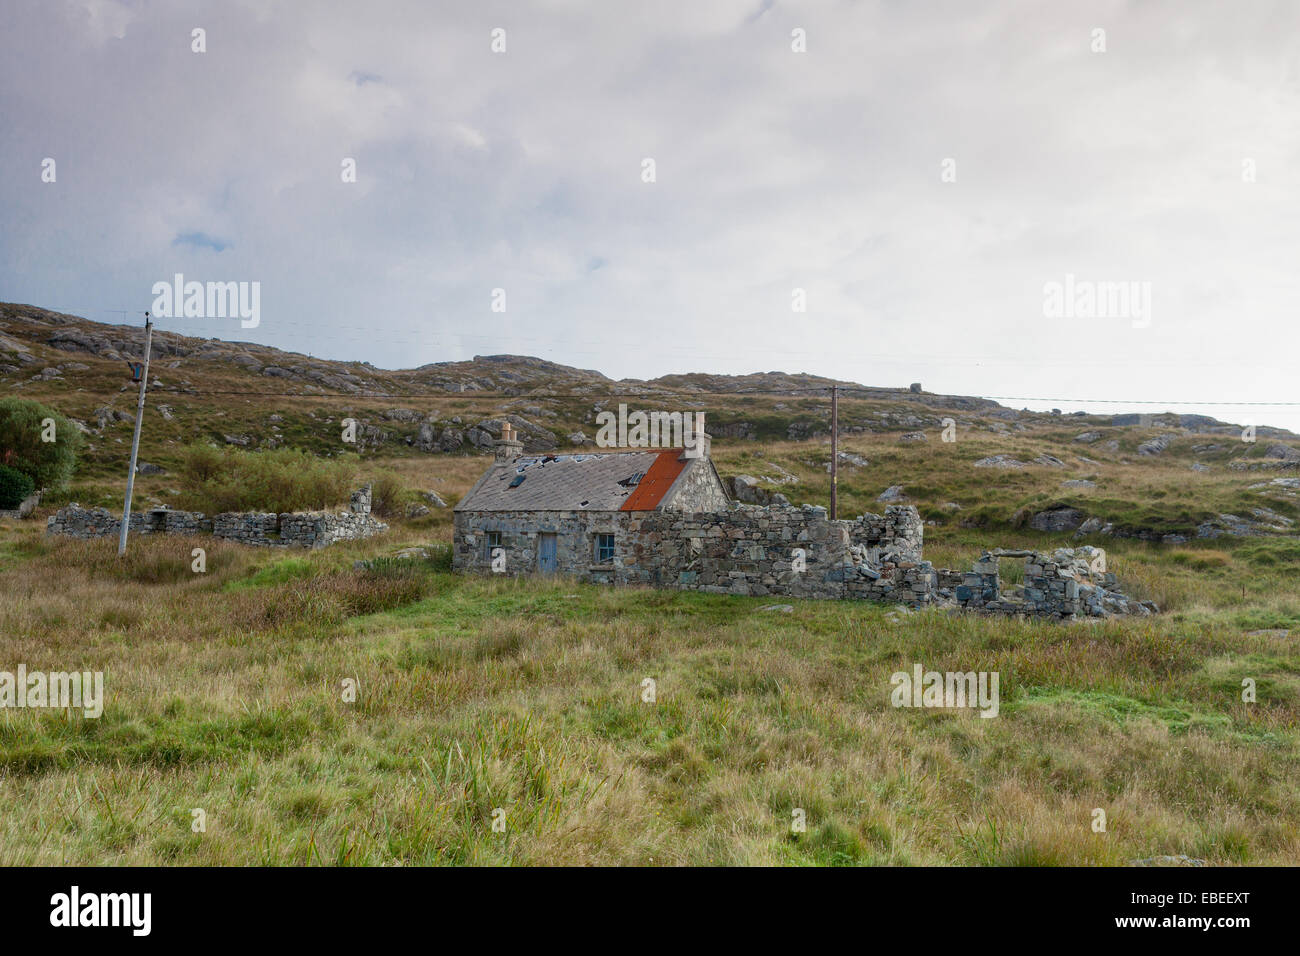 Abandoned cottage by Caolas Stocinis, Loch Stocinis, Isle of Harris, Outer Hebrides, Scotland Stock Photo